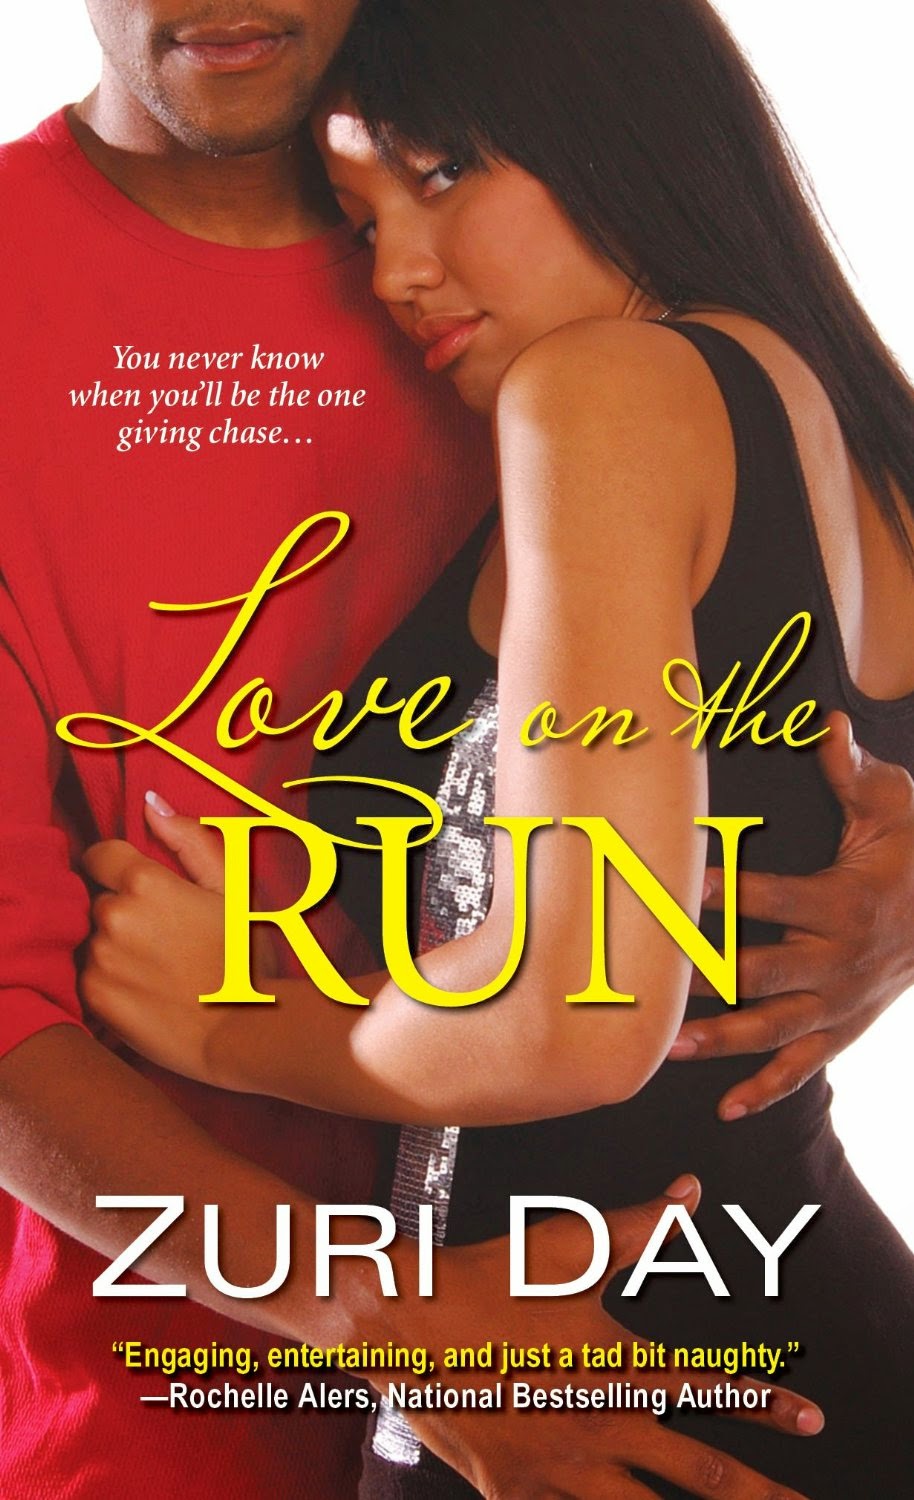 http://discover.halifaxpubliclibraries.ca/?q=title:%22love%20on%20the%20run%22day